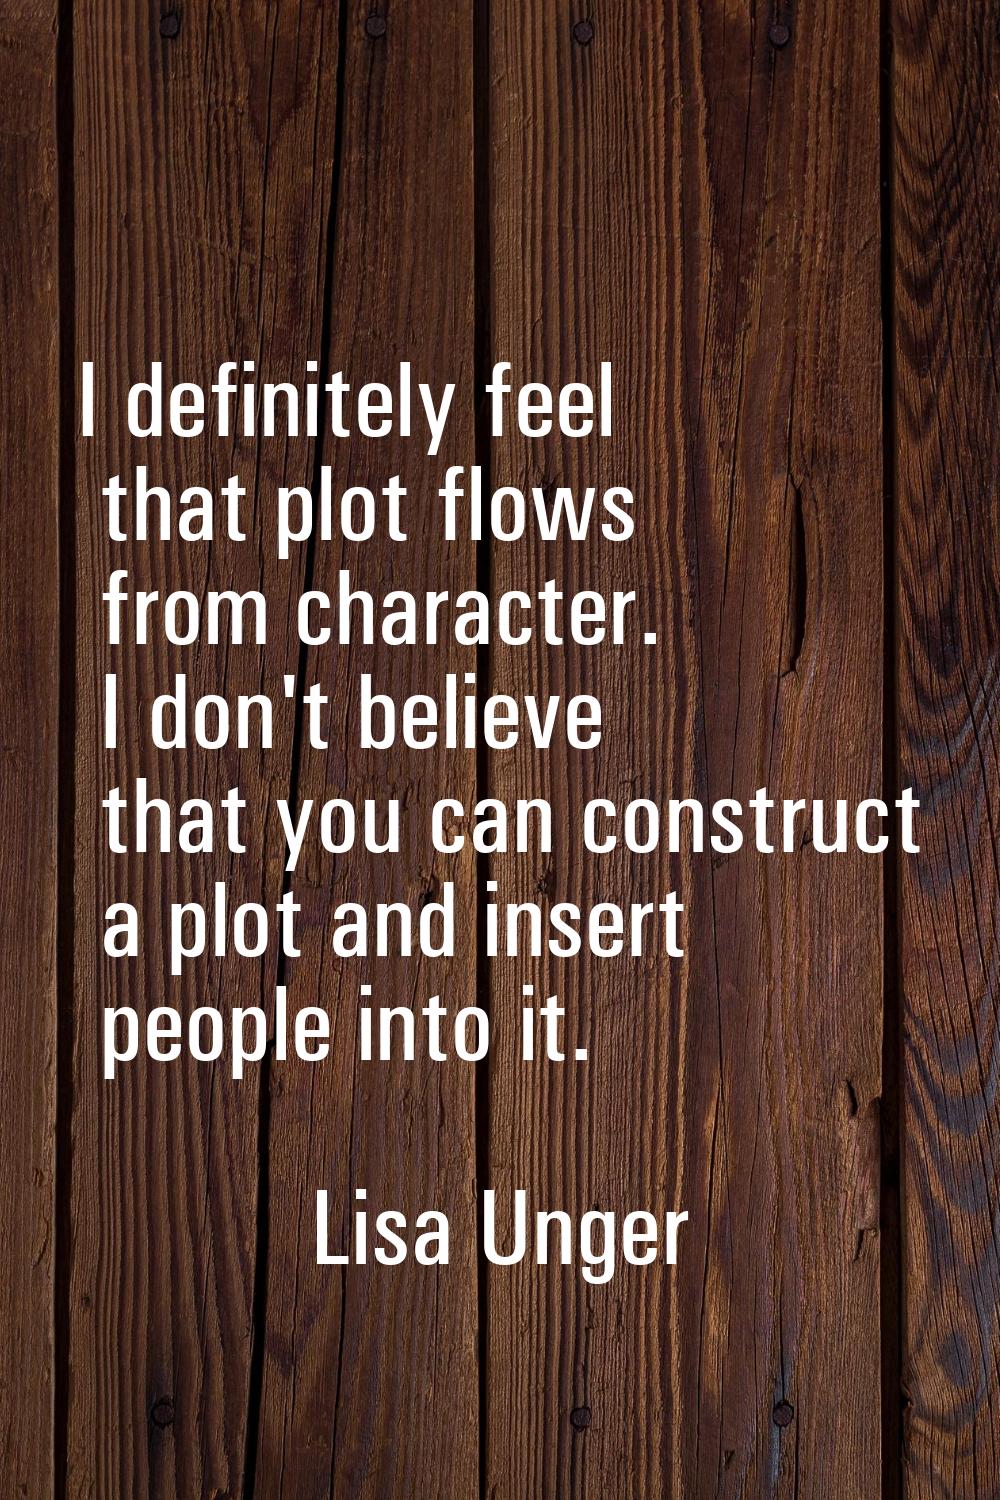 I definitely feel that plot flows from character. I don't believe that you can construct a plot and